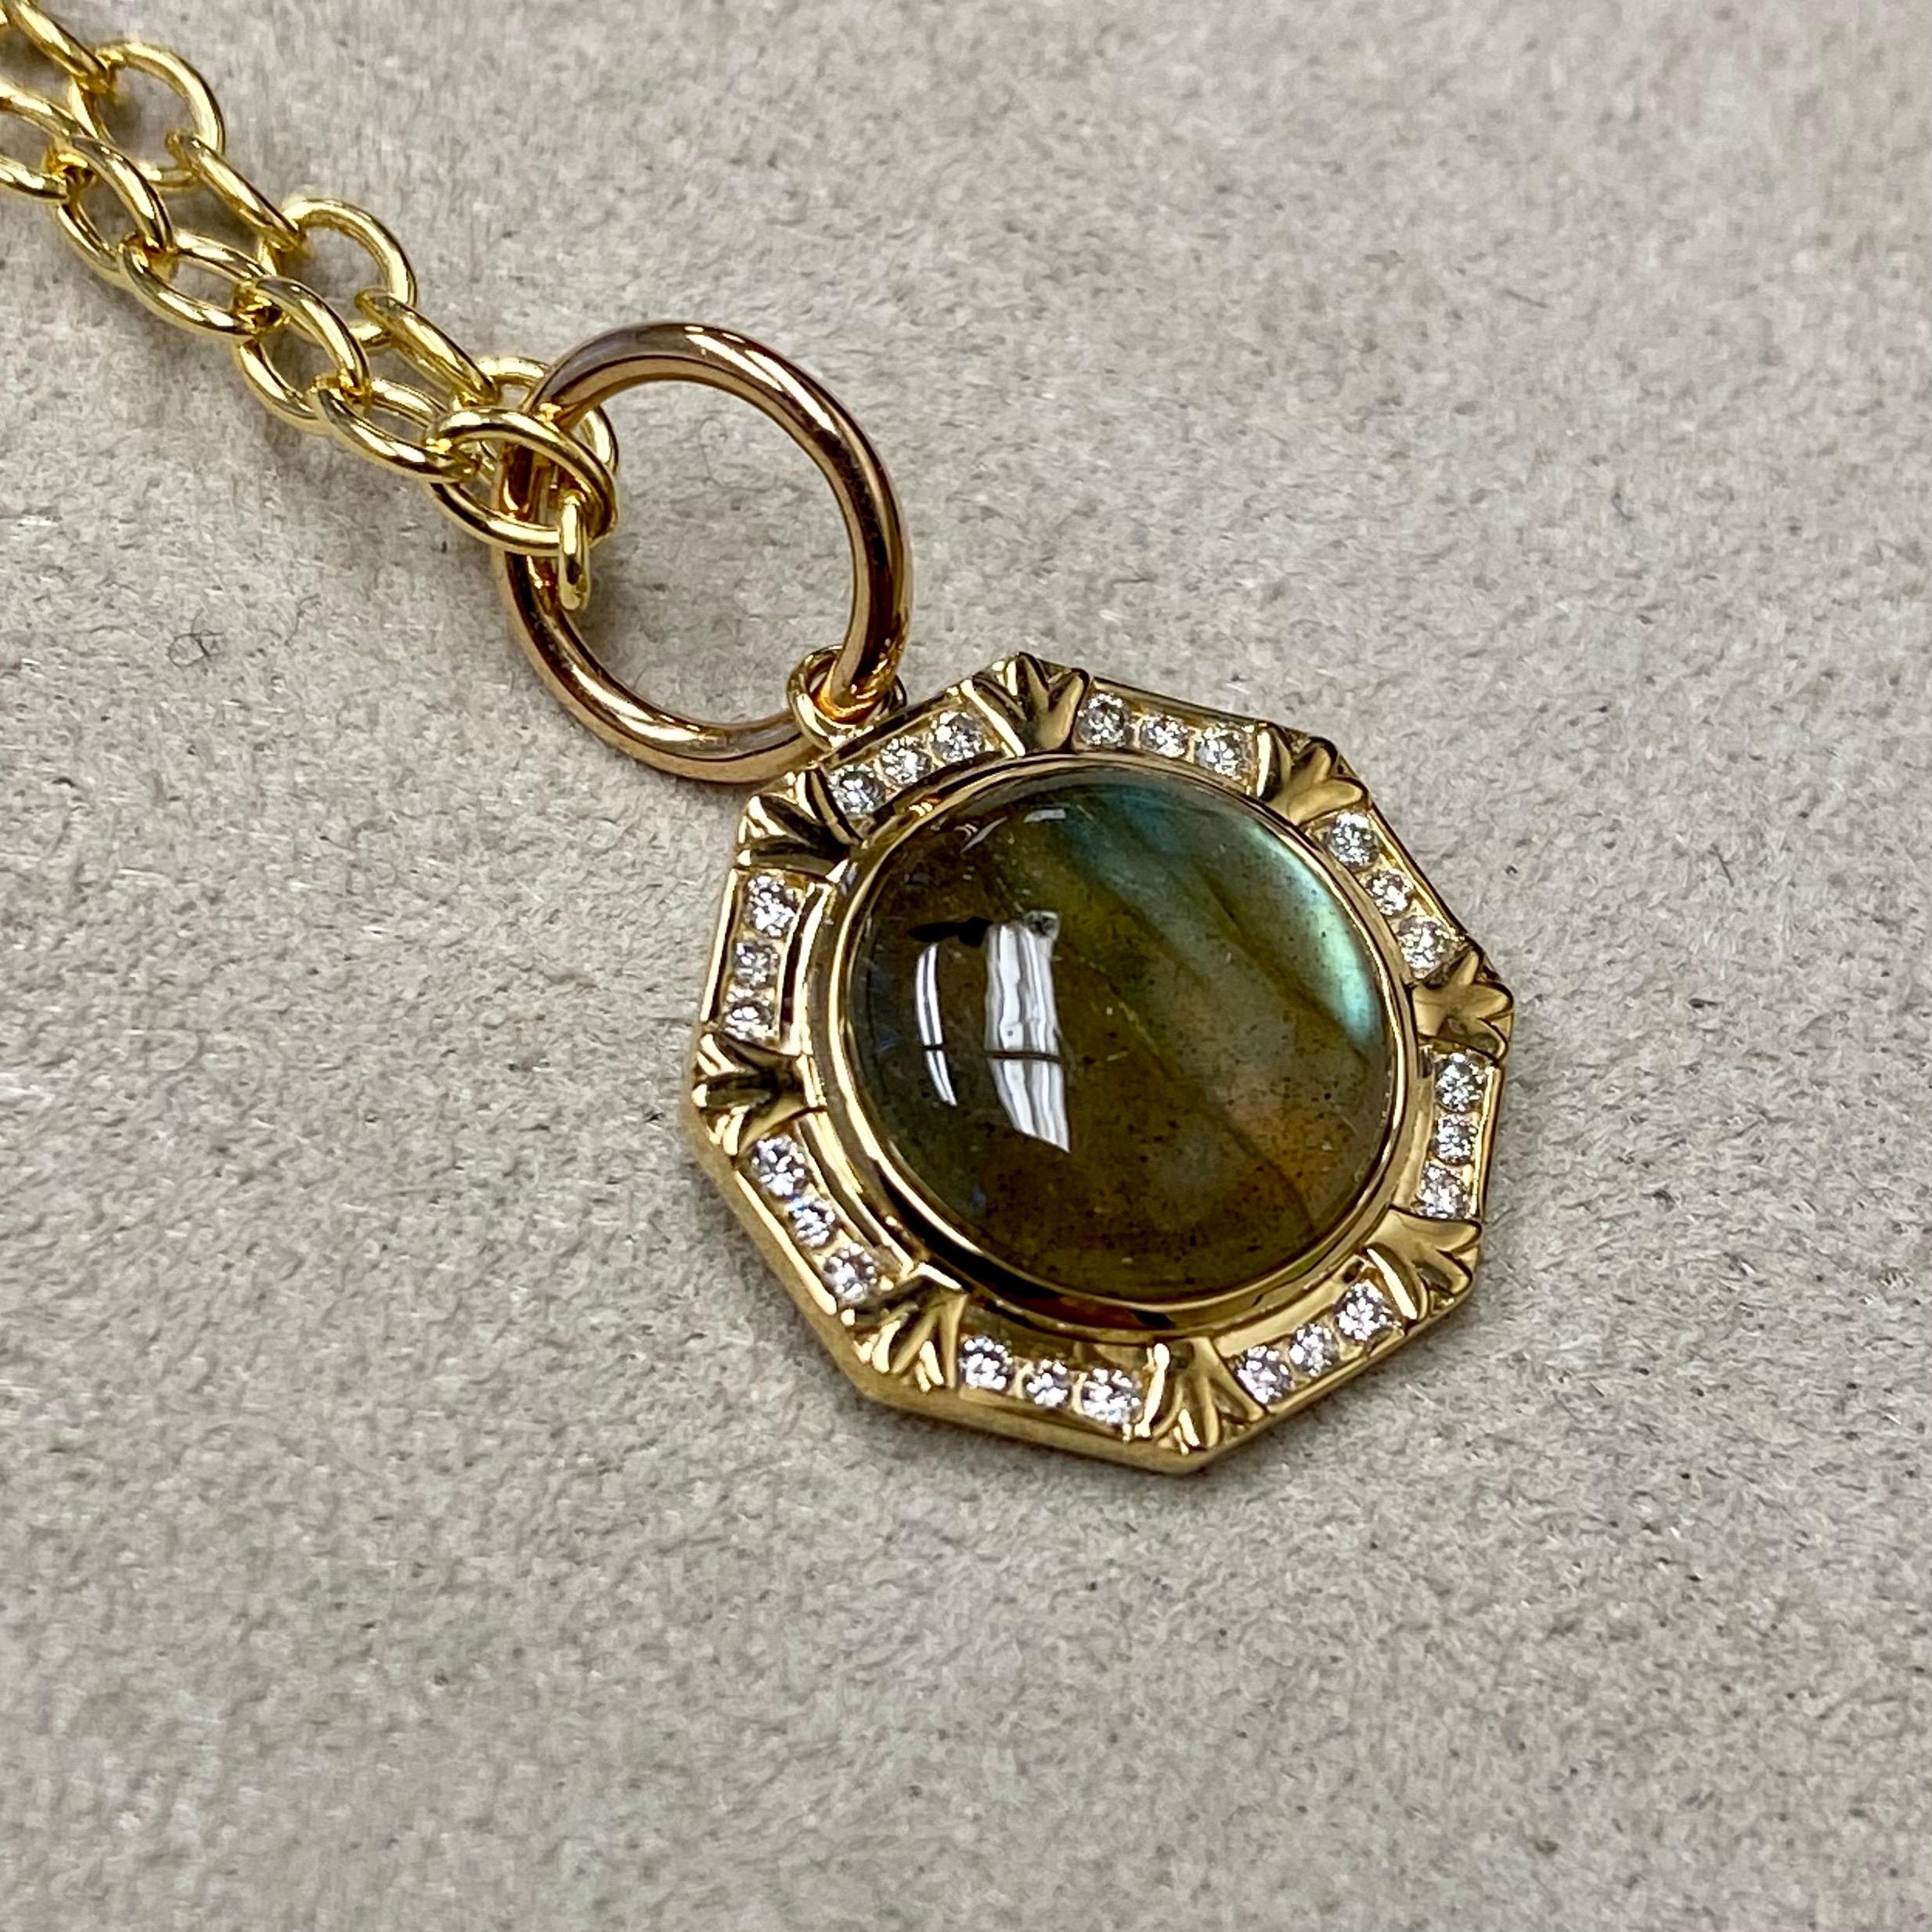 Created in 18kyg
Labradorite 2.5 carats approx.
Diamonds 0.11 carat approx.
Chain sold separately 
Limited edition

Crafted from 18 karat yellow gold, this limited edition pendant is encrusted with a majestic 2.5 carat labradorite and adorned with